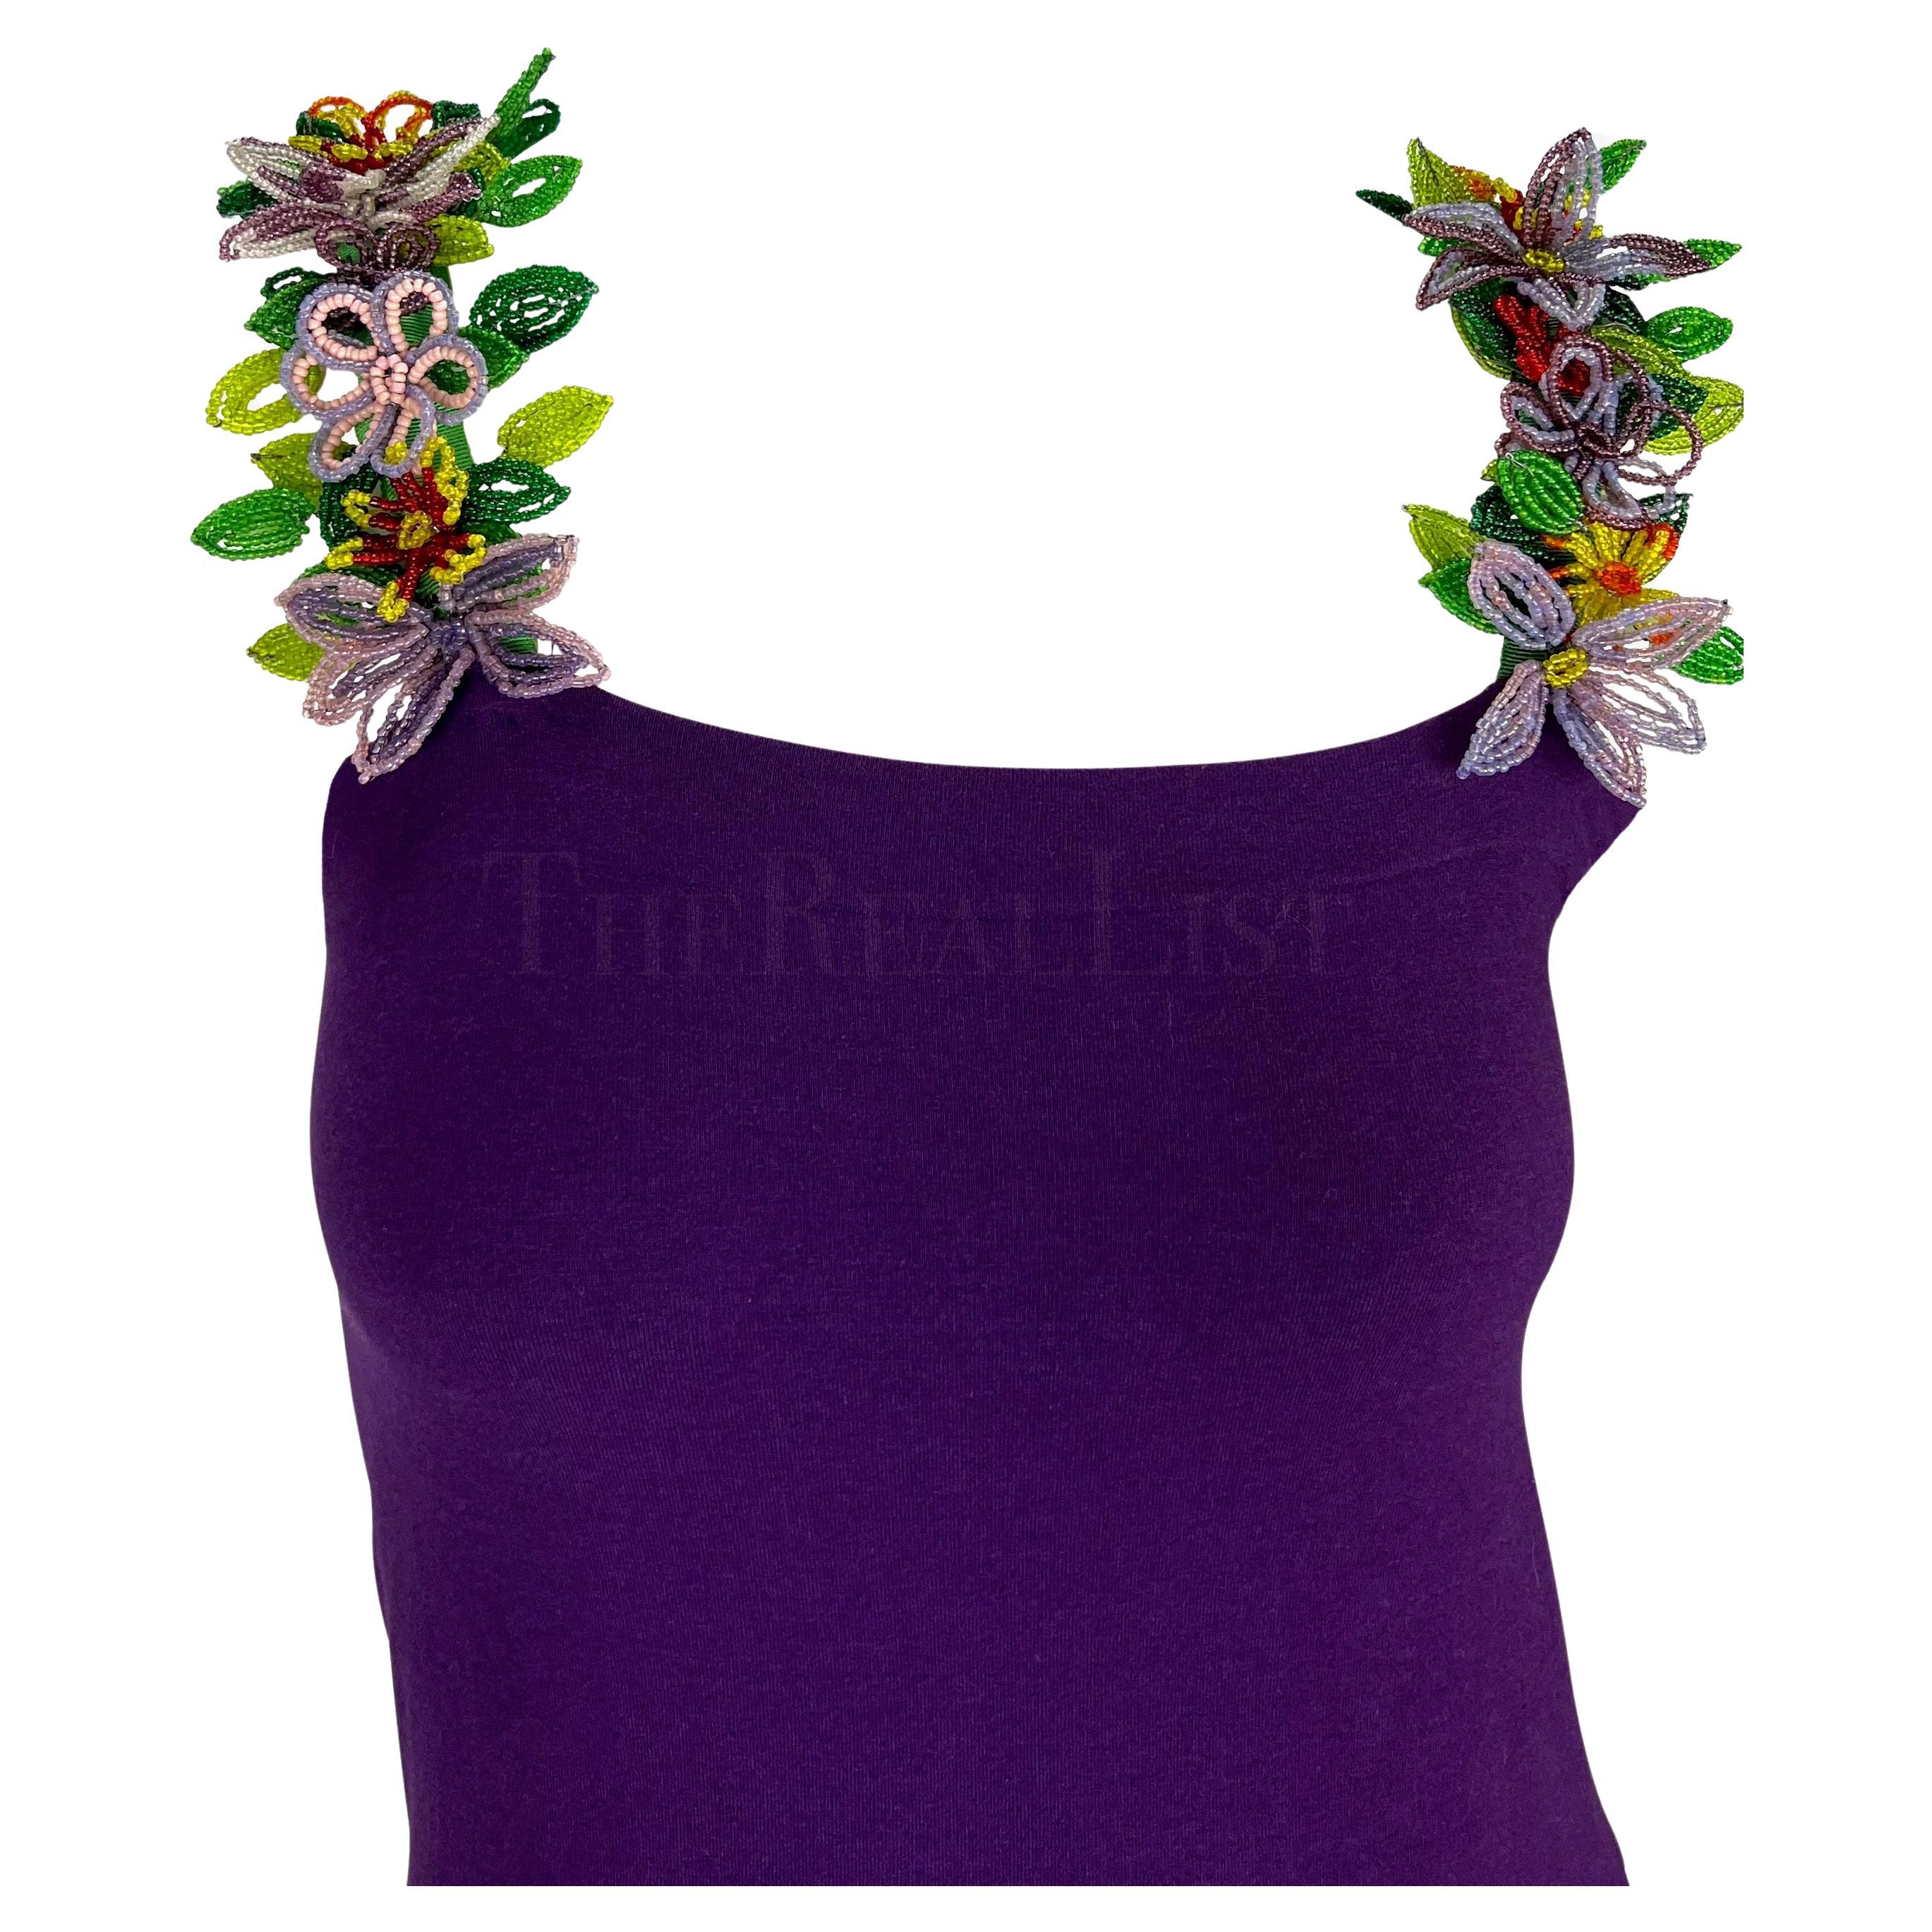 Presenting an incredible deep purple Dolce & Gabbana floral beaded body con dress. From the  Spring/Summer 1992 collection, this body con tube dress is accented with multicolored floral beaded straps. The structured beaded flowers add the perfect 3D